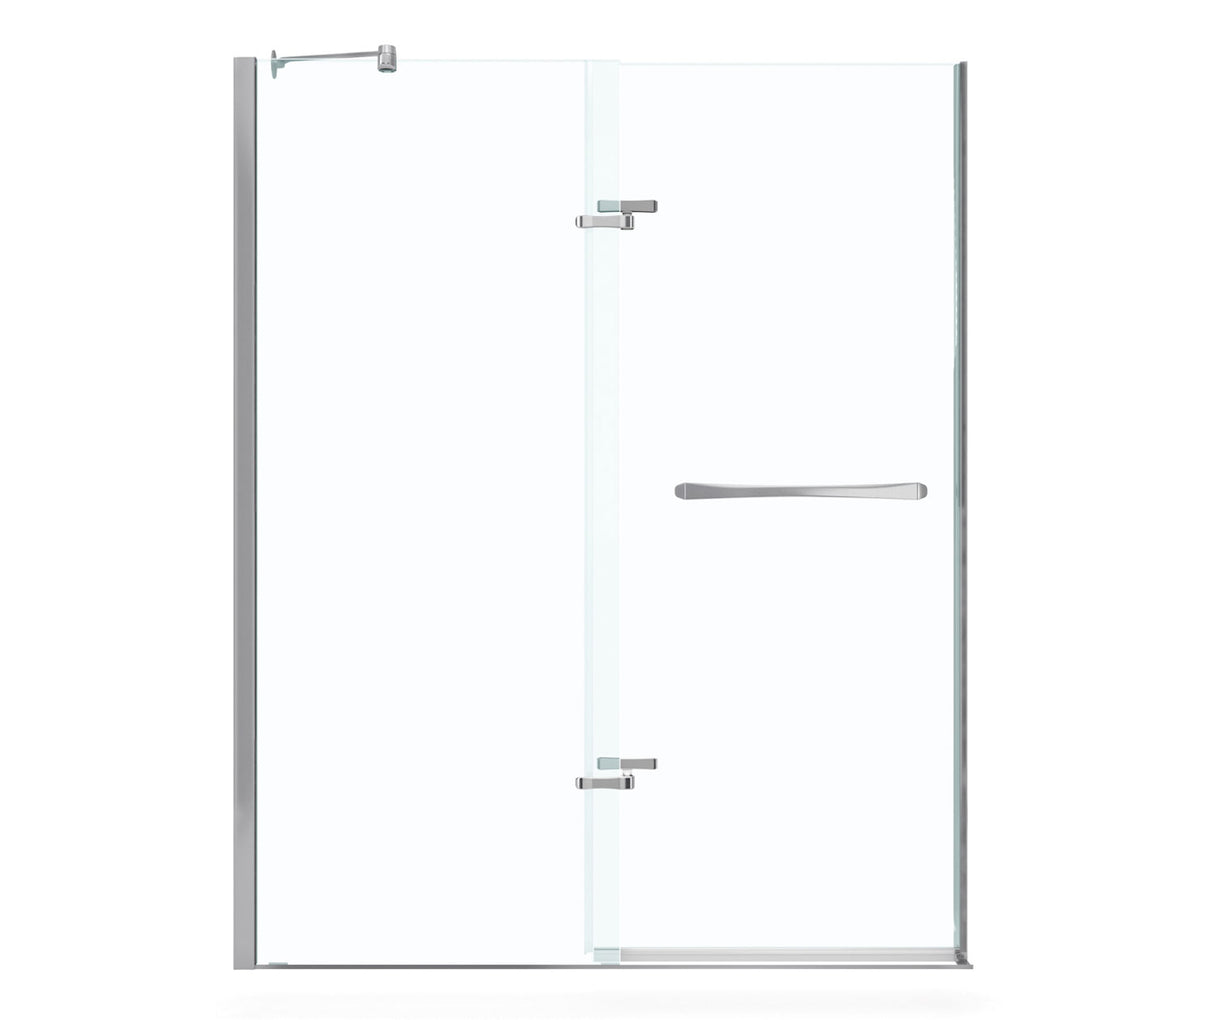 MAAX 136672-900-084-000 Reveal 71 56-59 x 71 ½ in. 8mm Pivot Shower Door for Alcove Installation with Clear glass in Chrome